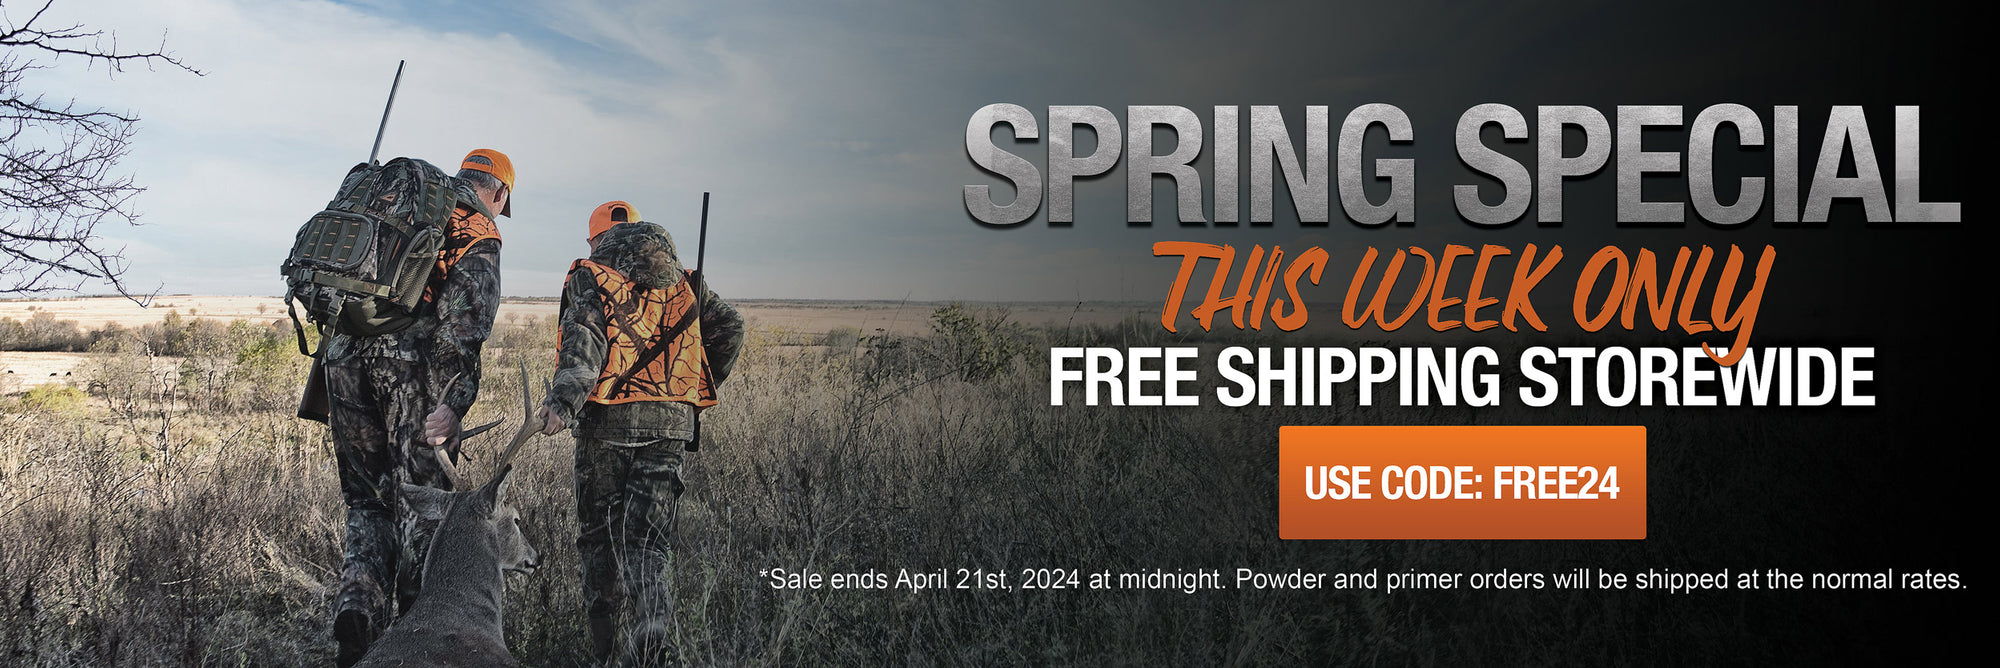 Free Shipping on Muzzleloaders